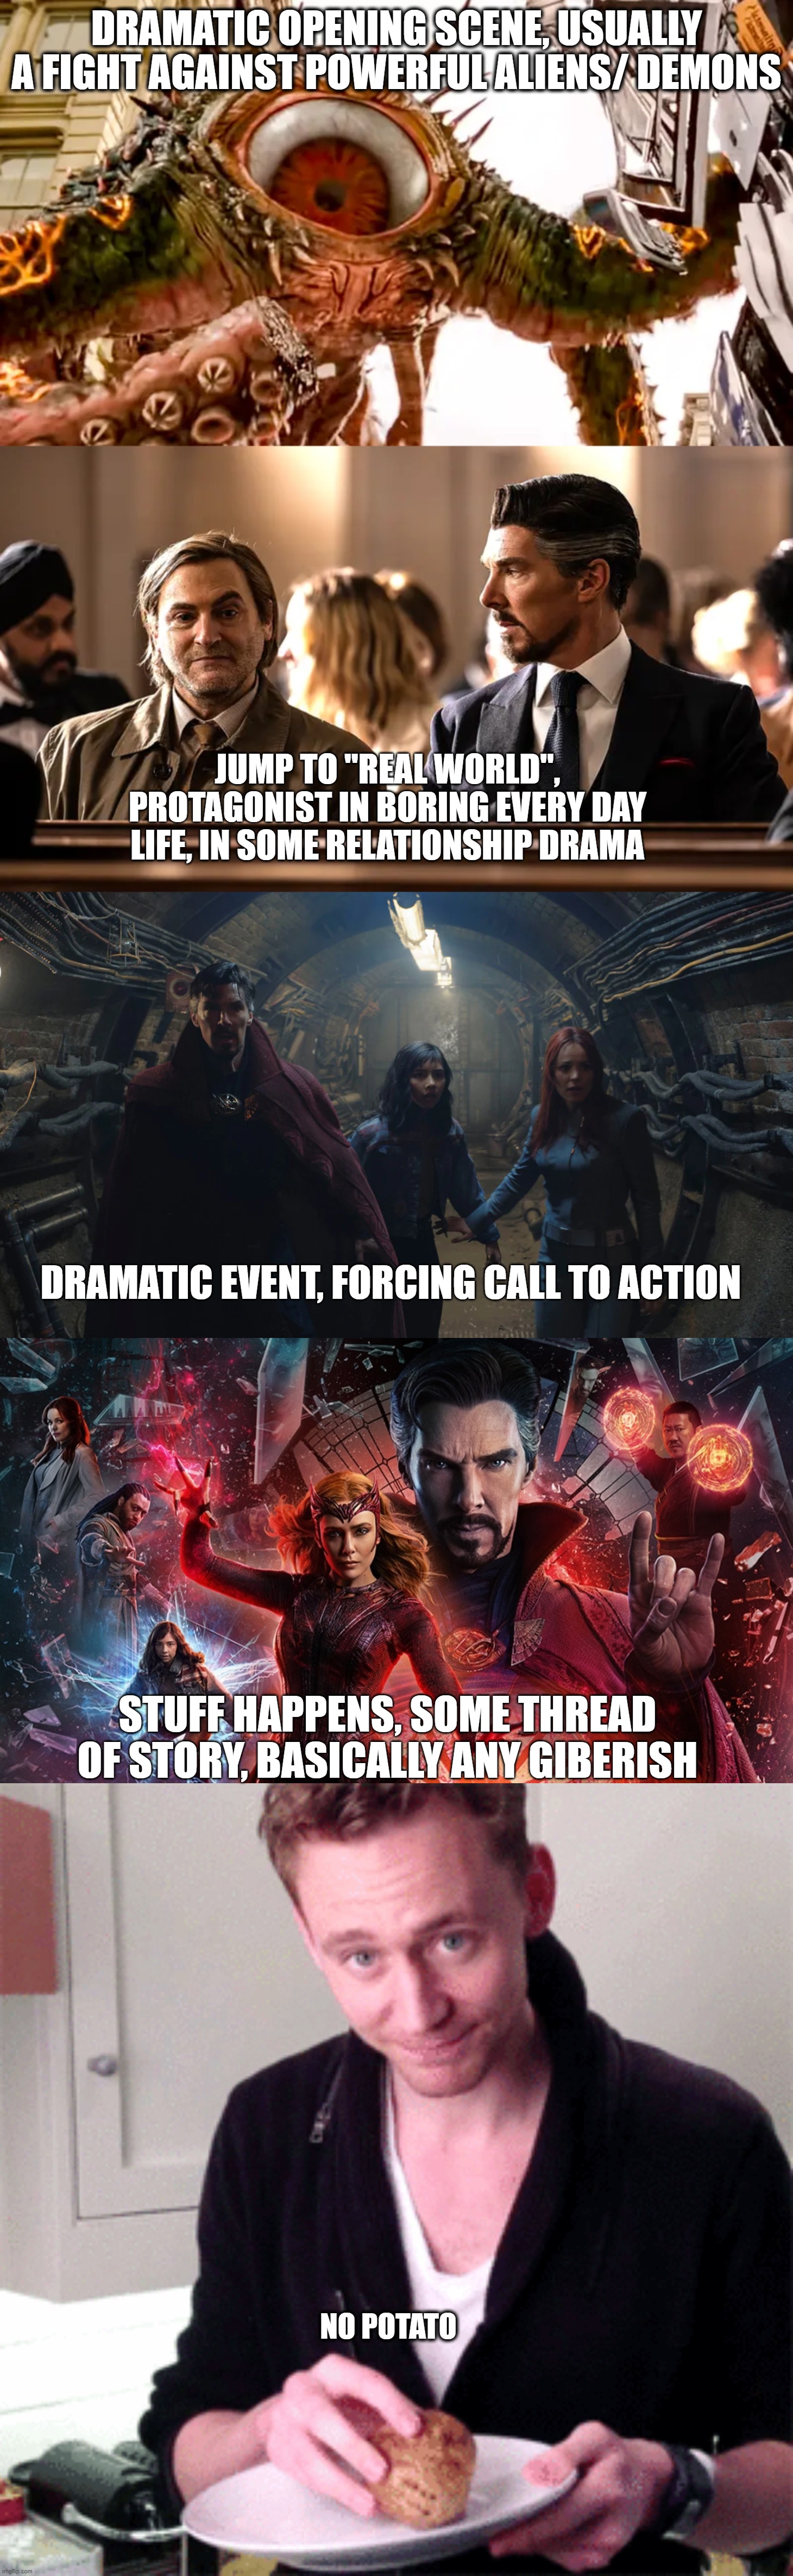 Every MCU movie formula | DRAMATIC OPENING SCENE, USUALLY A FIGHT AGAINST POWERFUL ALIENS/ DEMONS; JUMP TO "REAL WORLD", PROTAGONIST IN BORING EVERY DAY LIFE, IN SOME RELATIONSHIP DRAMA; DRAMATIC EVENT, FORCING CALL TO ACTION; STUFF HAPPENS, SOME THREAD OF STORY, BASICALLY ANY GIBERISH; NO POTATO | image tagged in mcu,marvel,dr strange | made w/ Imgflip meme maker